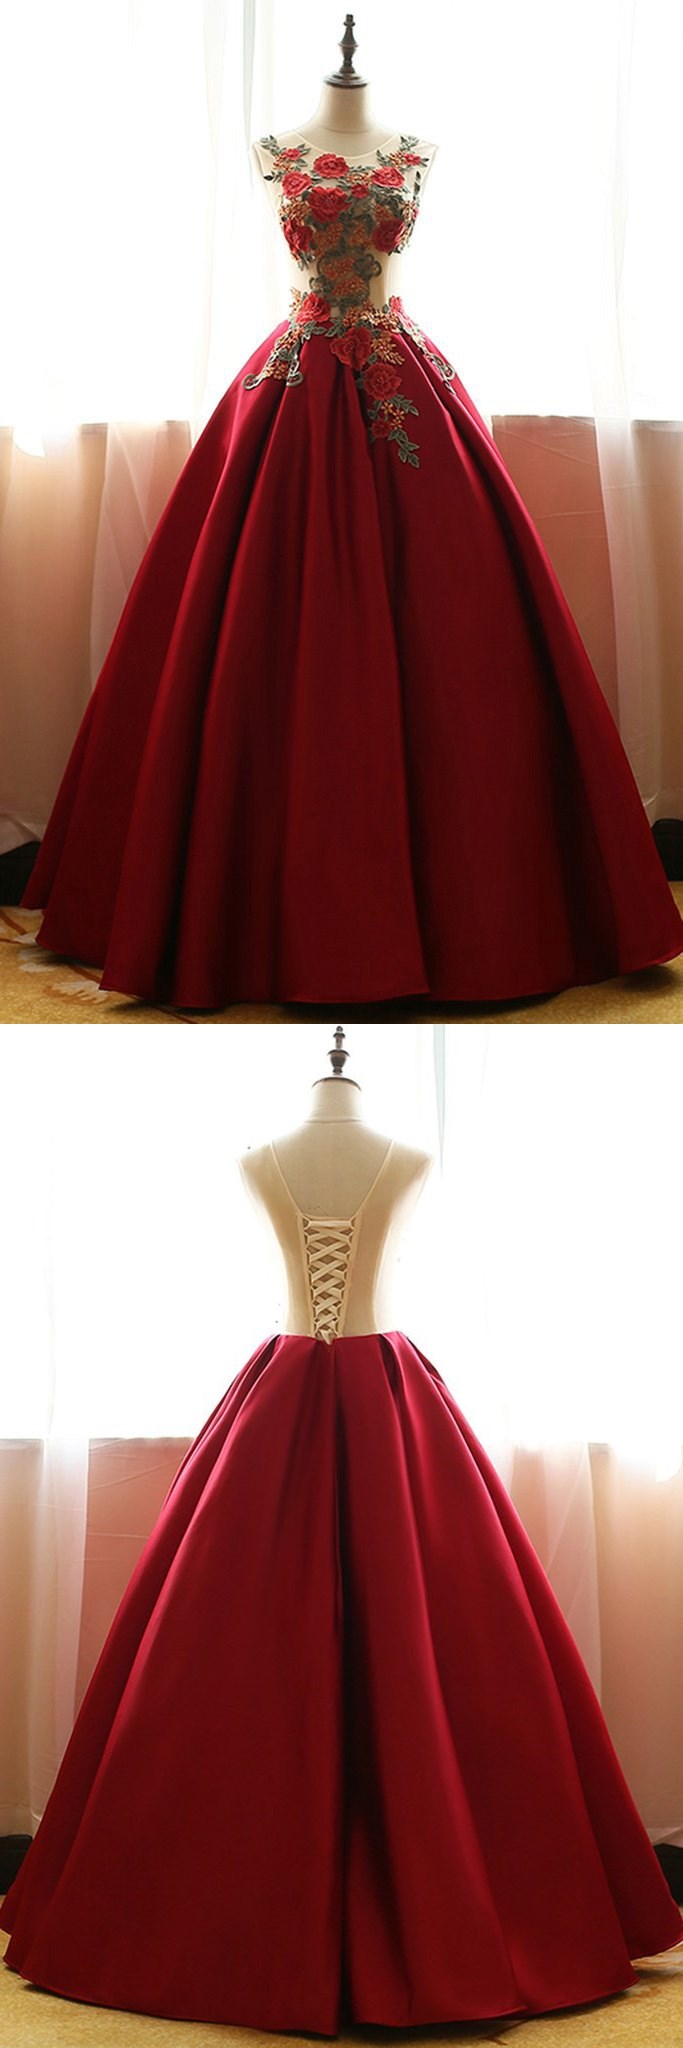 Red Quinceanera Dresses Floral Round Neck A-line Satin Applique Ball Gown